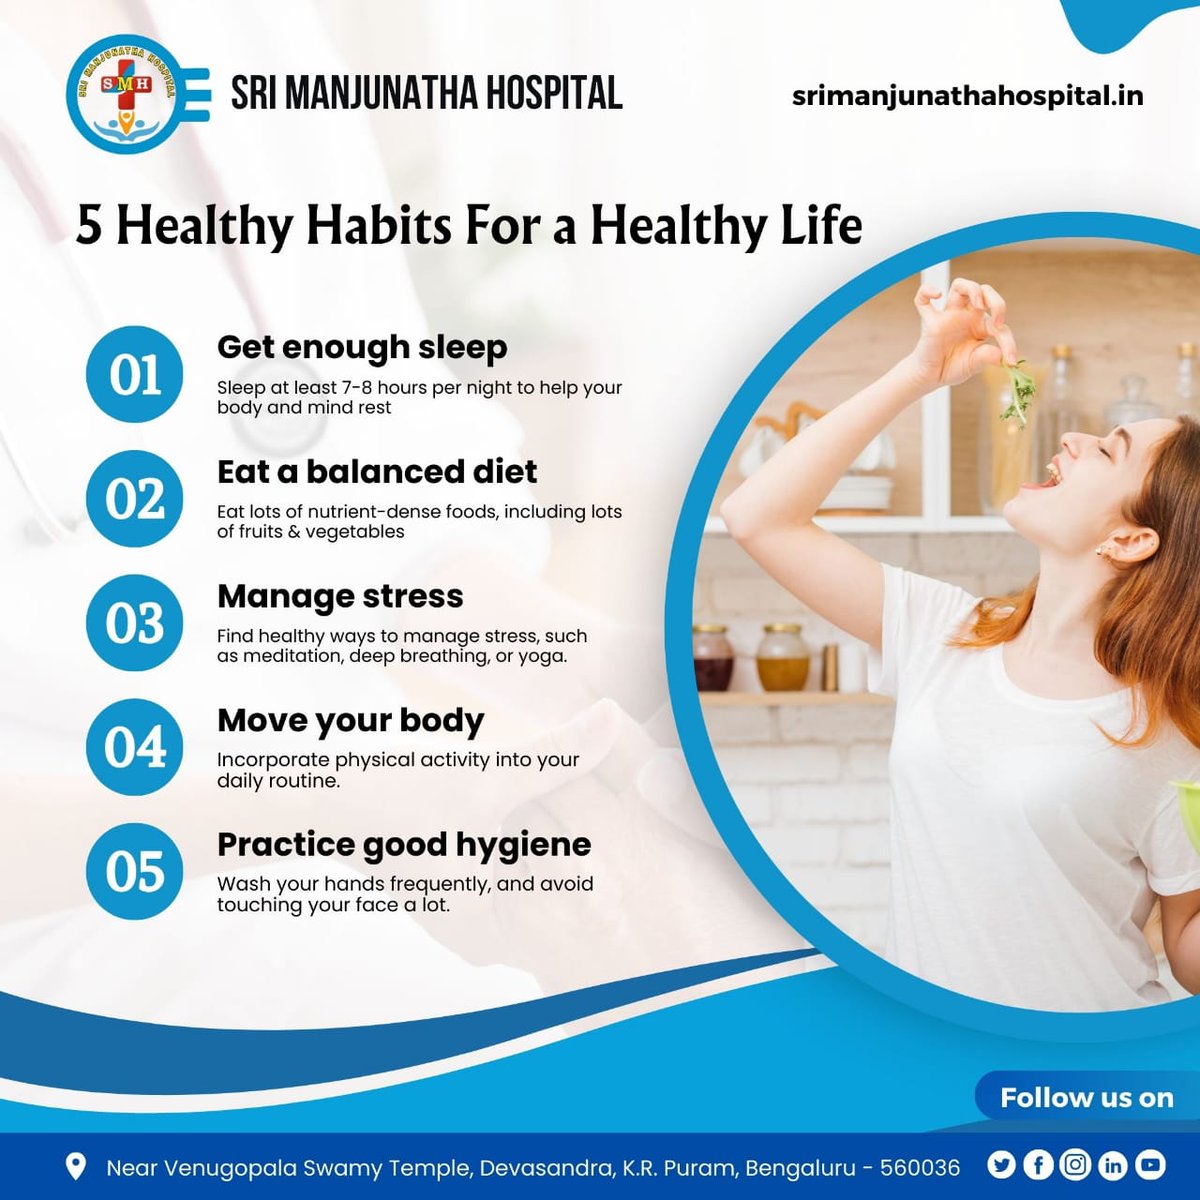 Transform your life with these 5 essential healthy habits! 🌱💪

#HealthyLiving #WellnessJourney #healthylife #healthylifestyle #healthylifetips #sleepwell #balanceddiet #managestress #physicalactivities #hygienetips #srimanjunathahospital